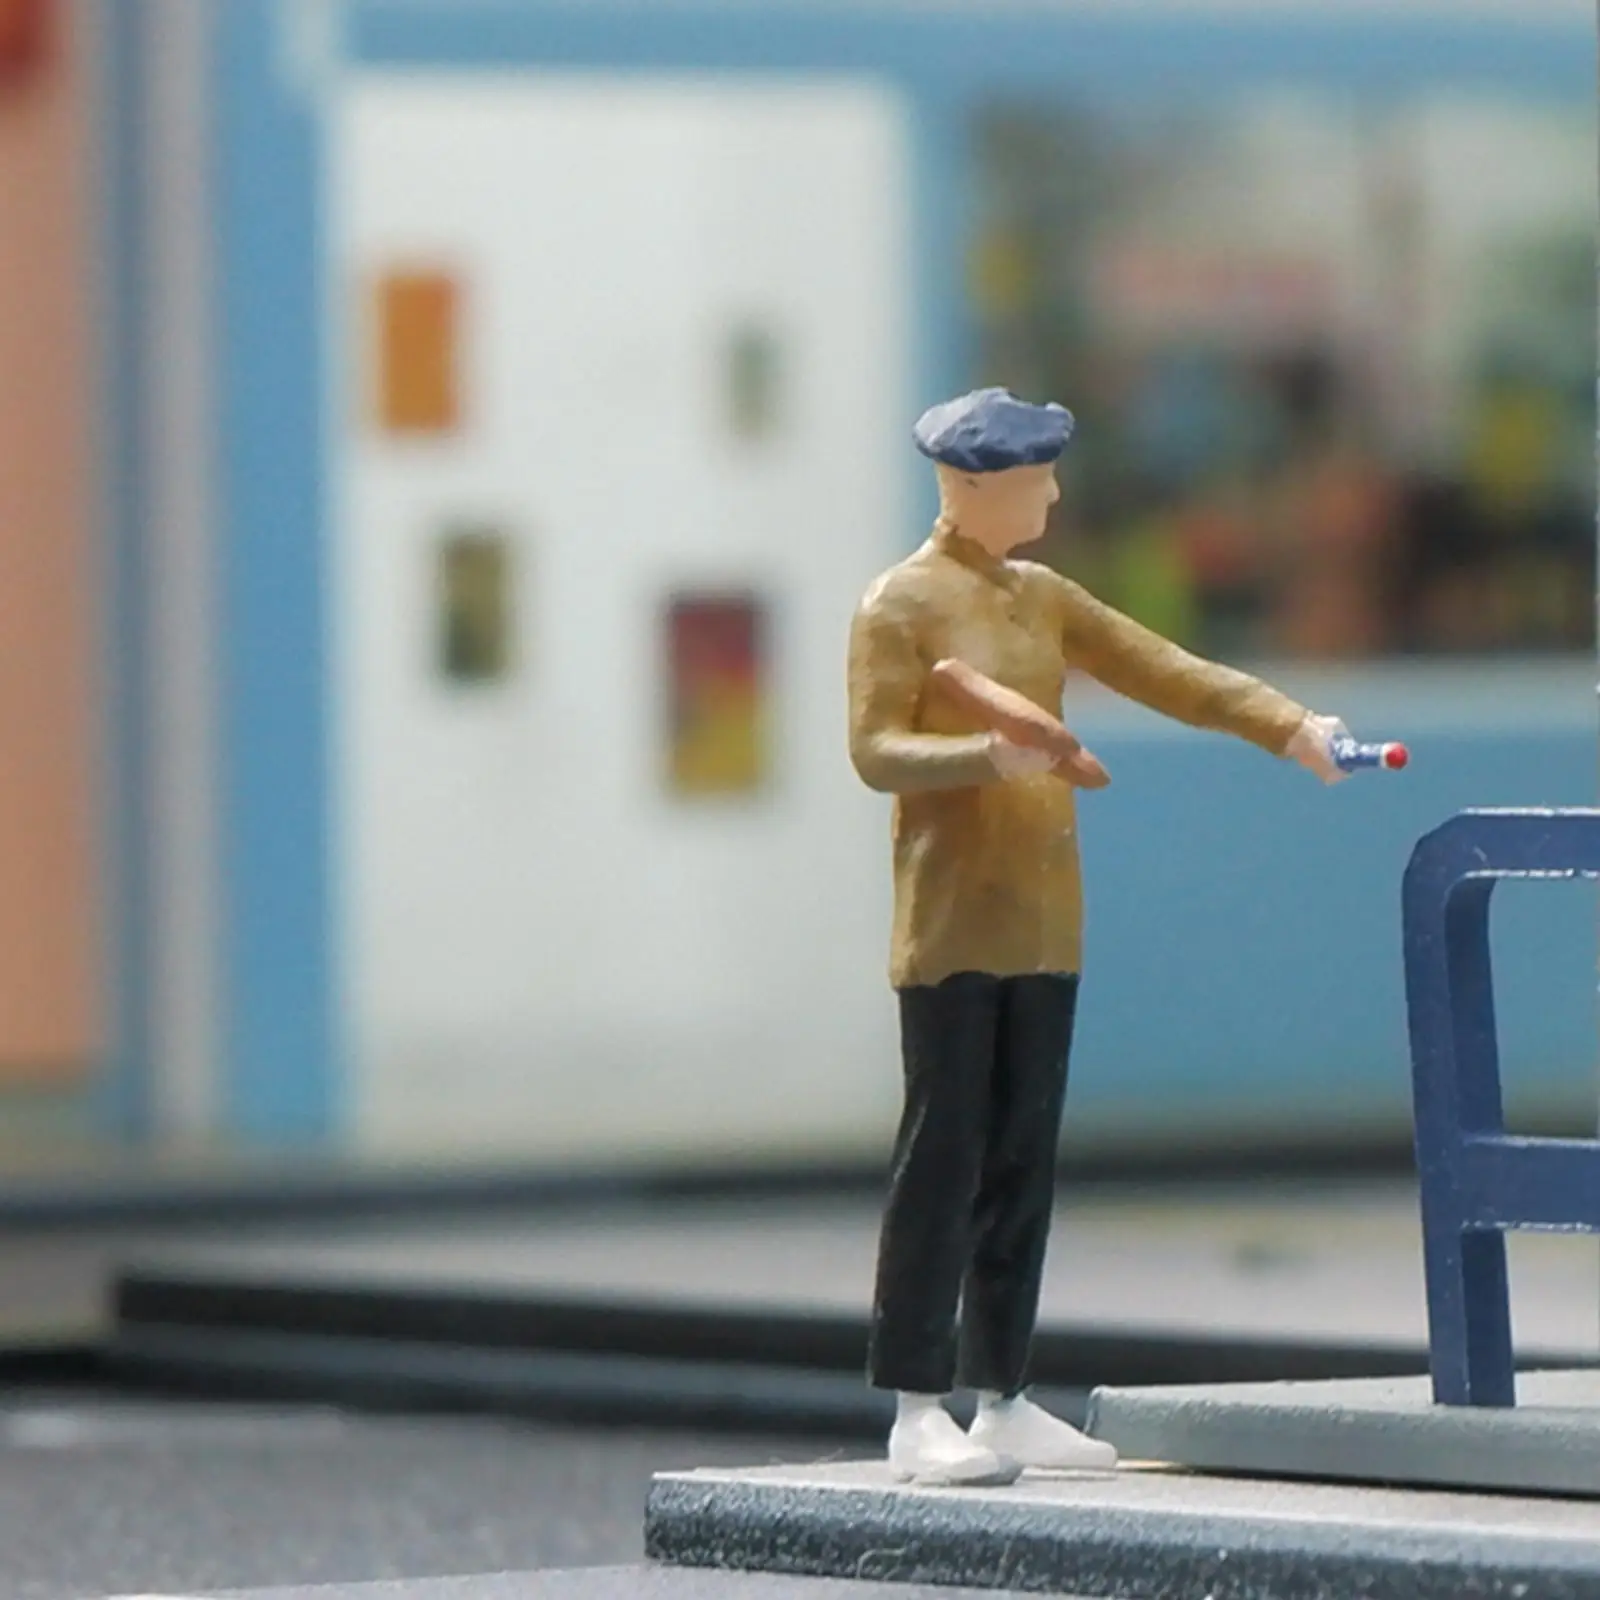 People Figurines Character Model 1/64 HO Scale Miniature Scene People for Train Station Layout DIY Scene Architectural Building